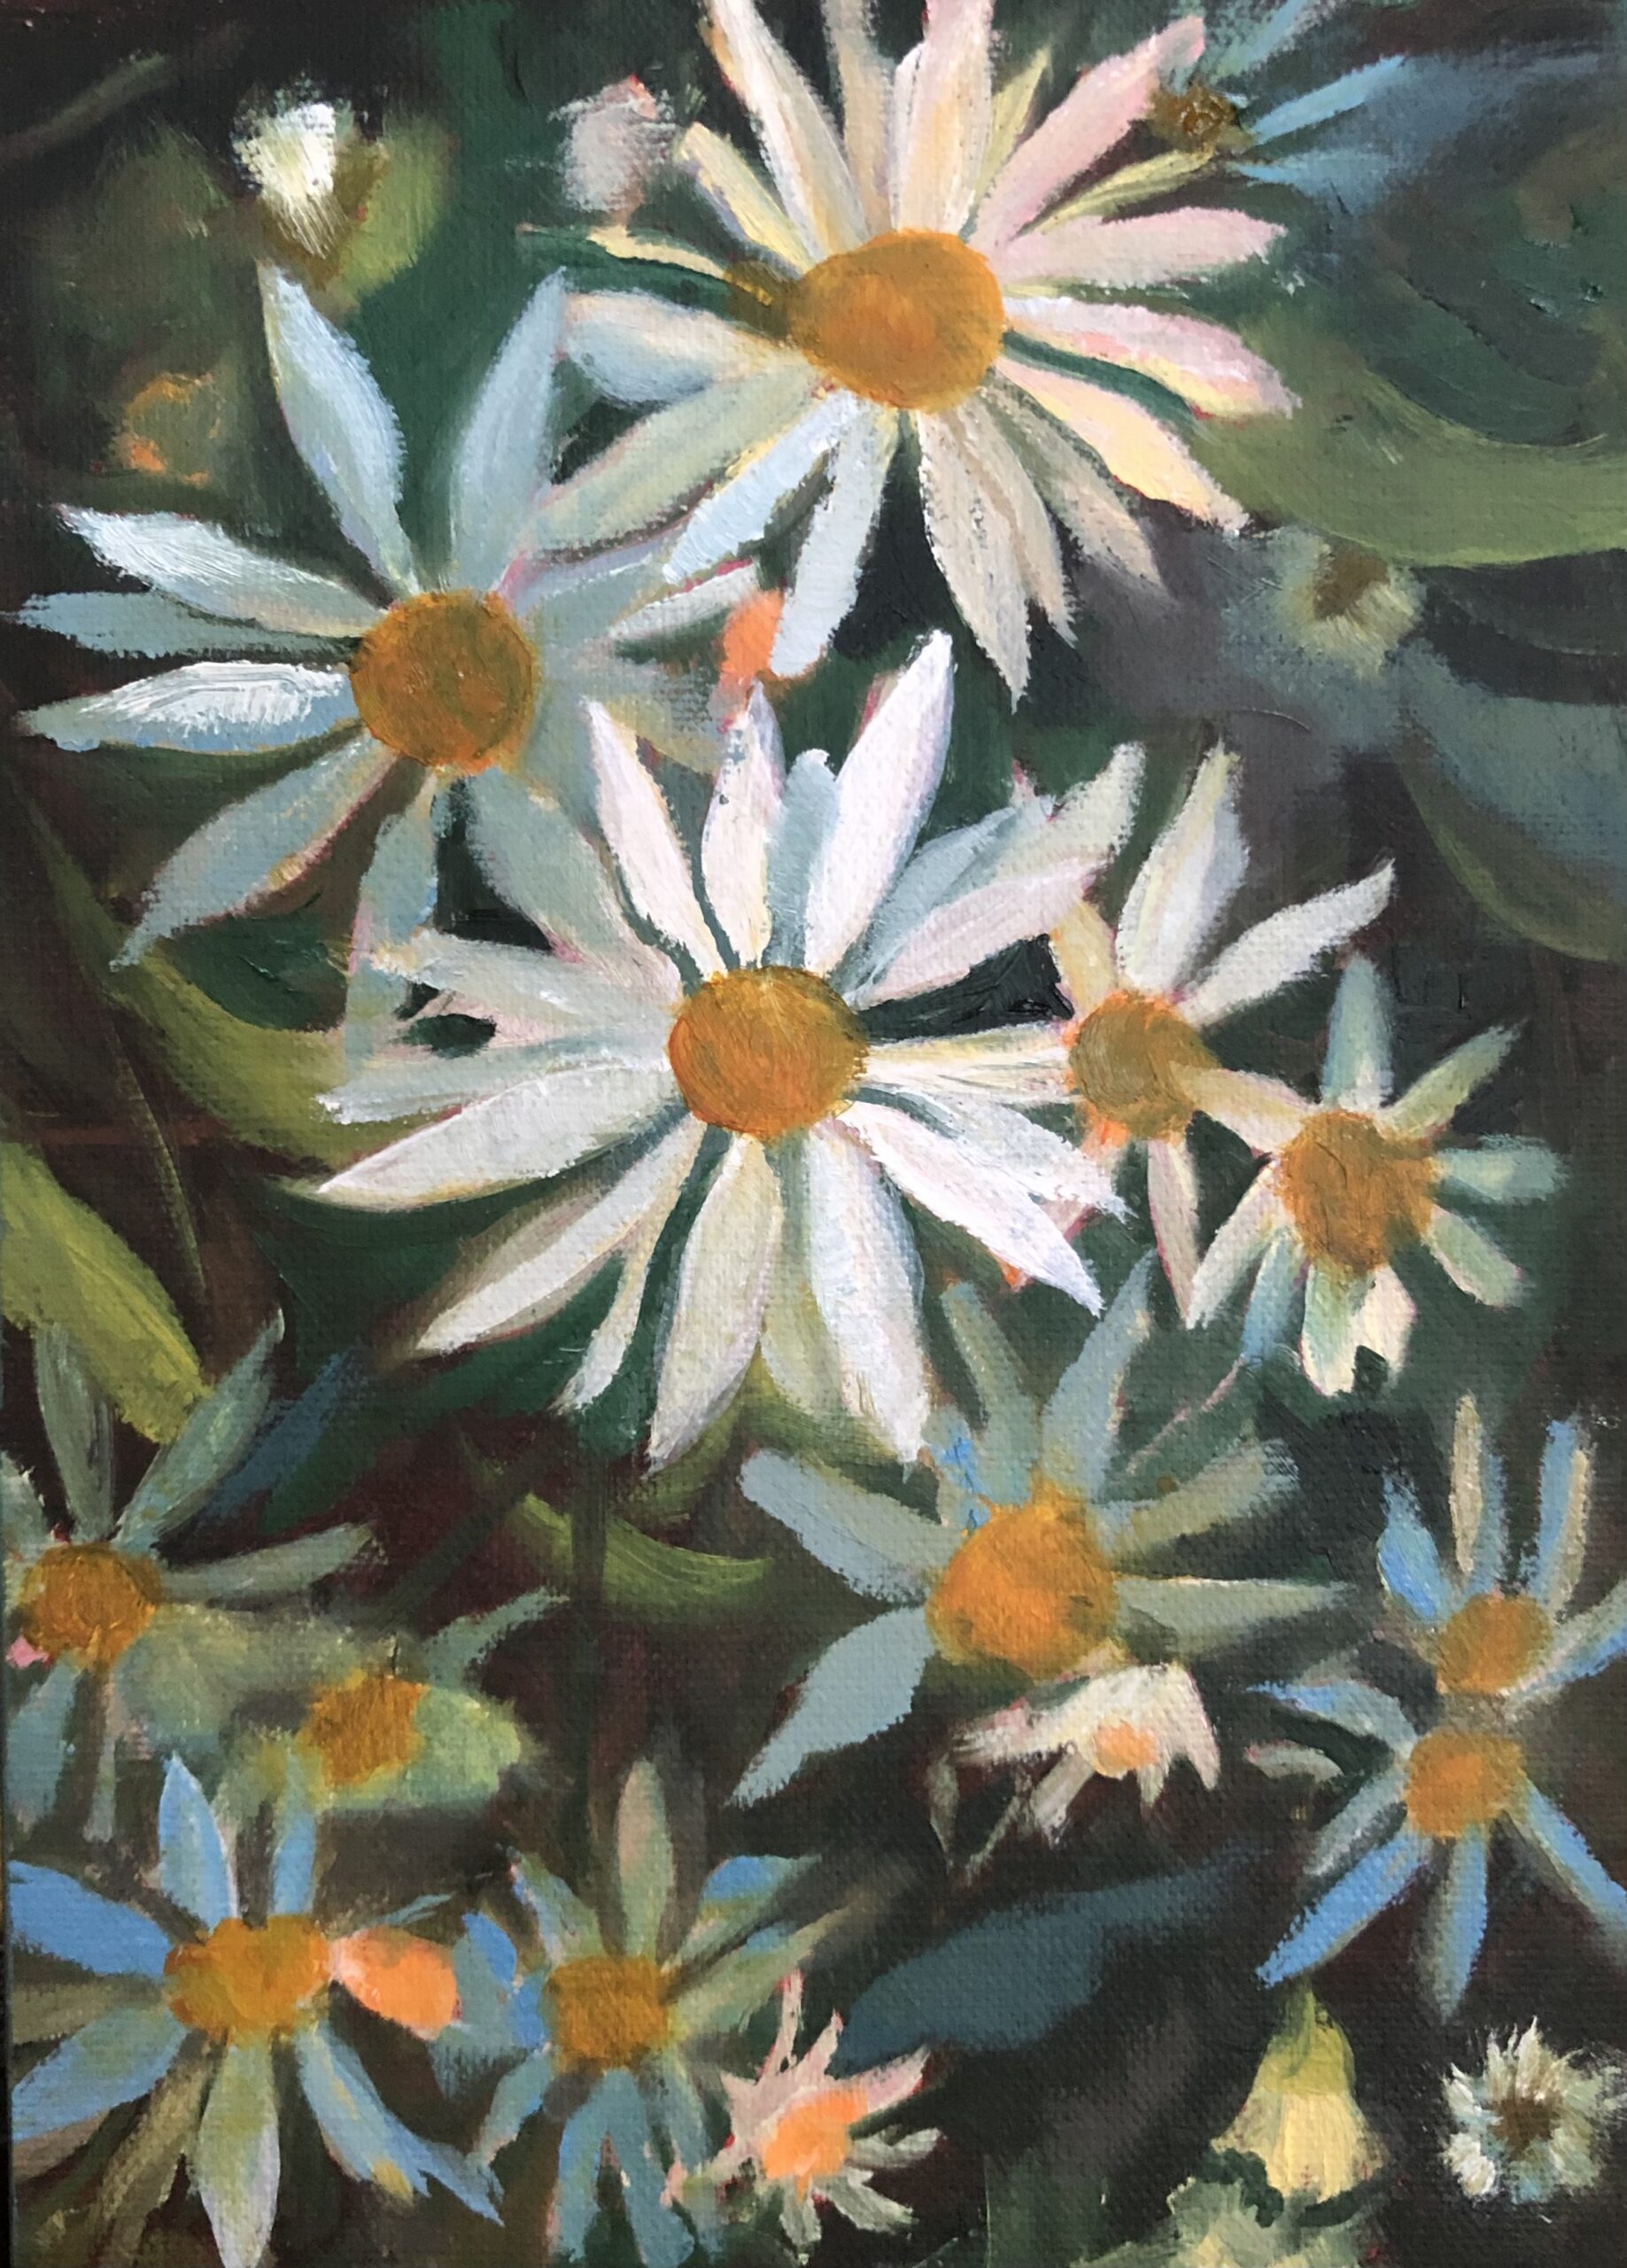 Parasol White Top of the Aster Family, oil on canvas, framed, 5X7, $165. Shelley Pillsbury.